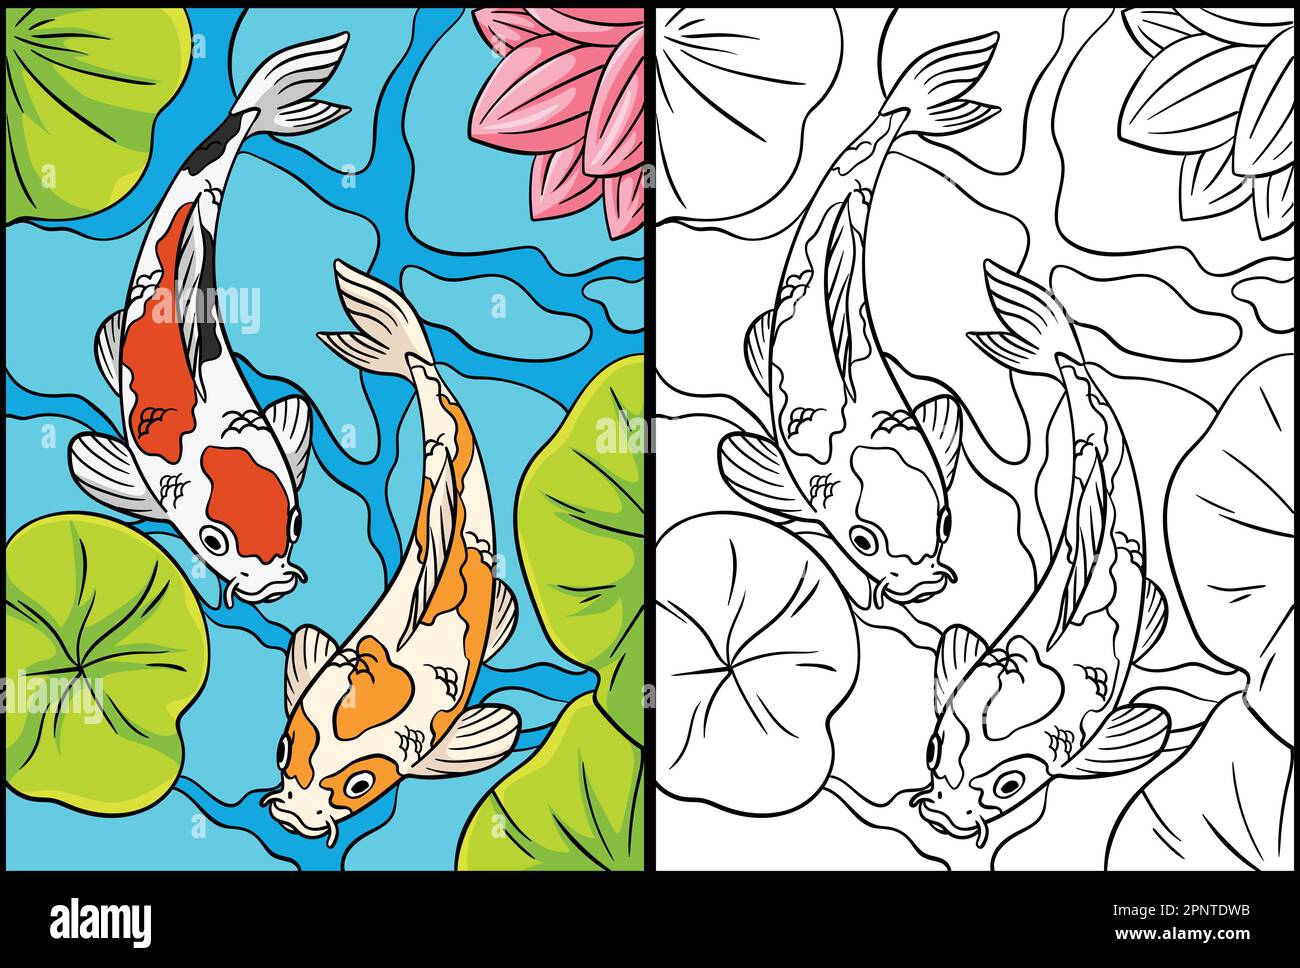 Koi Fish Coloring Page Colored Illustration Stock Vector